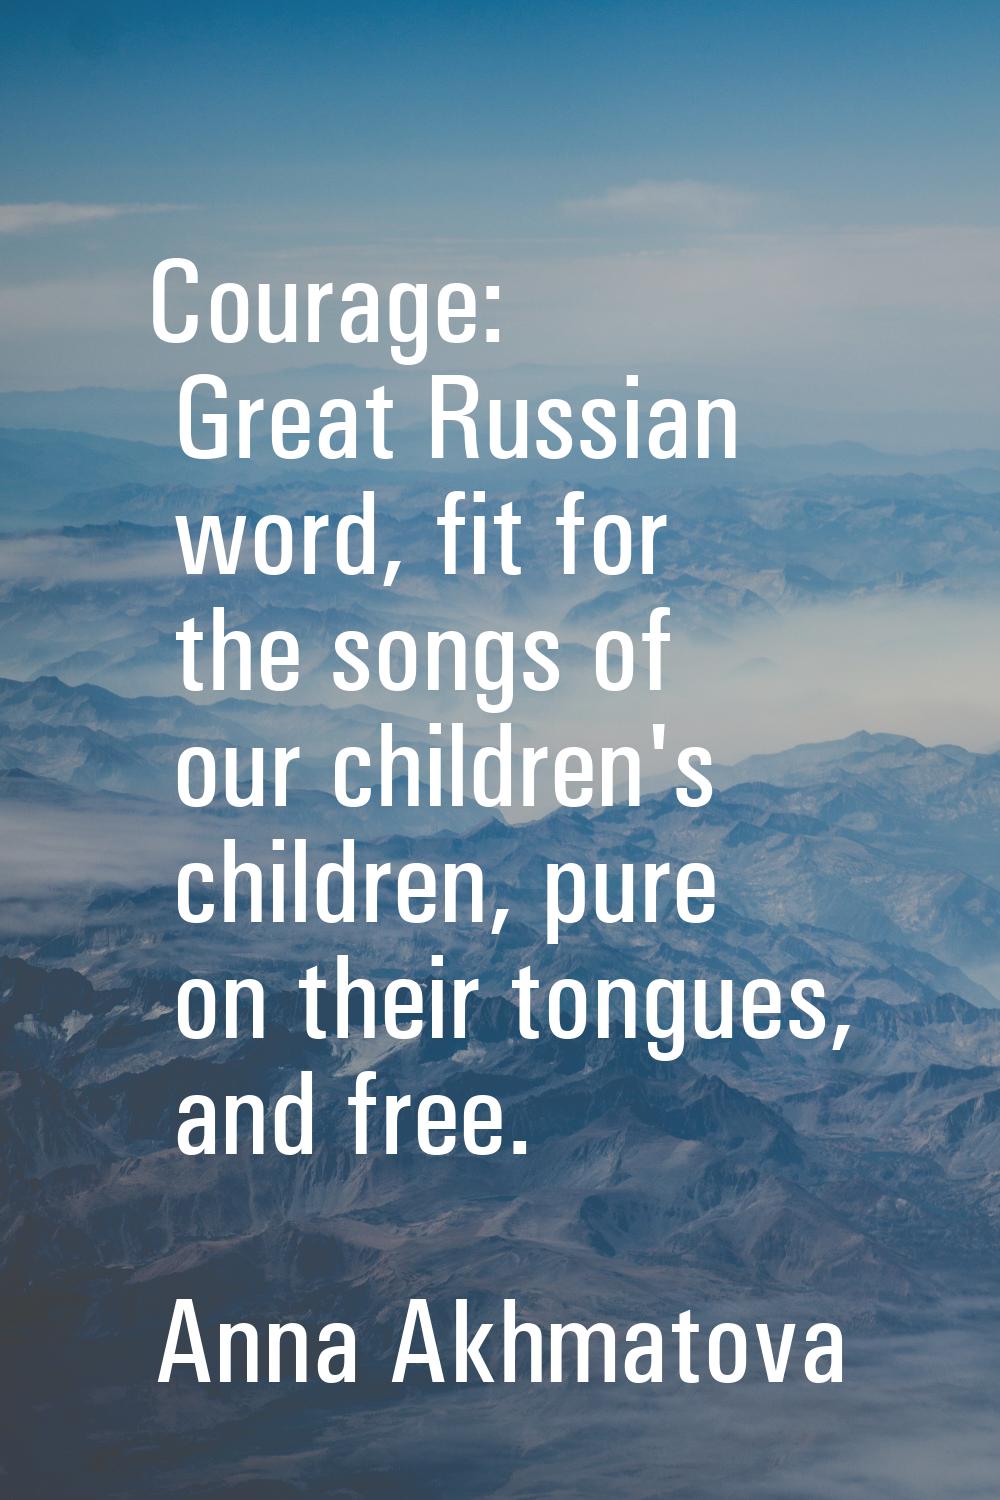 Courage: Great Russian word, fit for the songs of our children's children, pure on their tongues, a